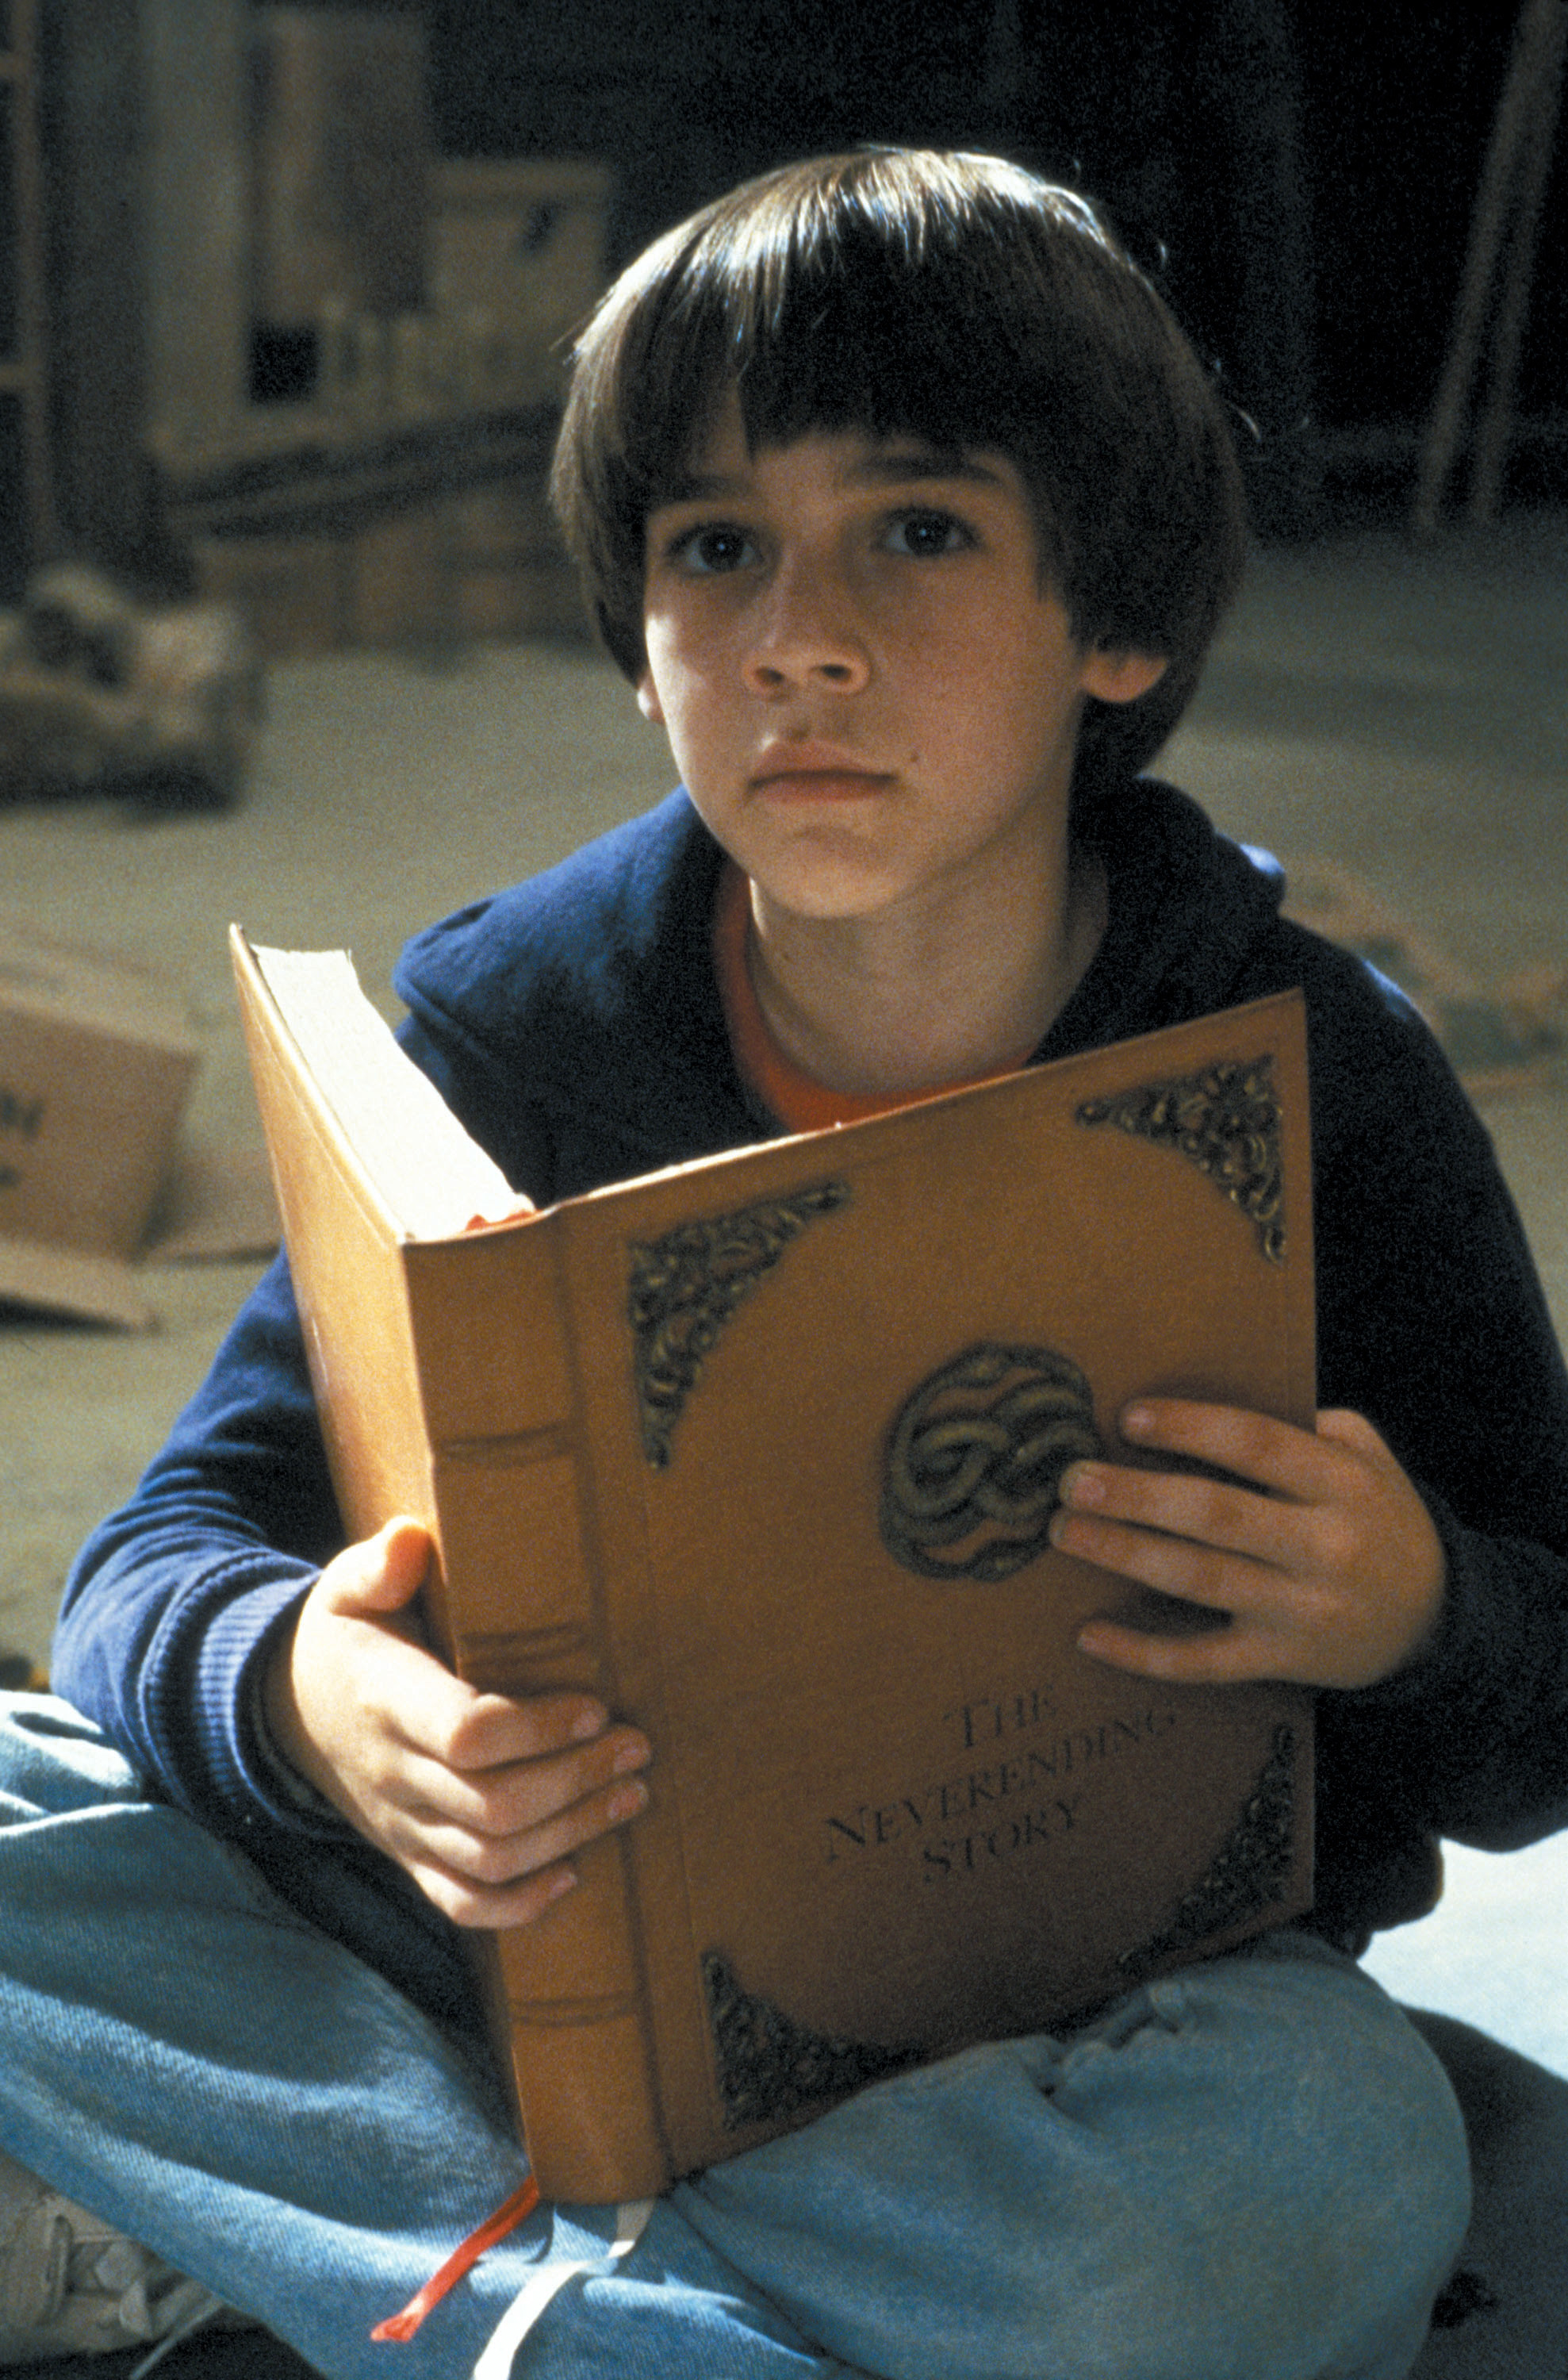 Barret as a child holding the book &quot;The Neverending Story&quot;